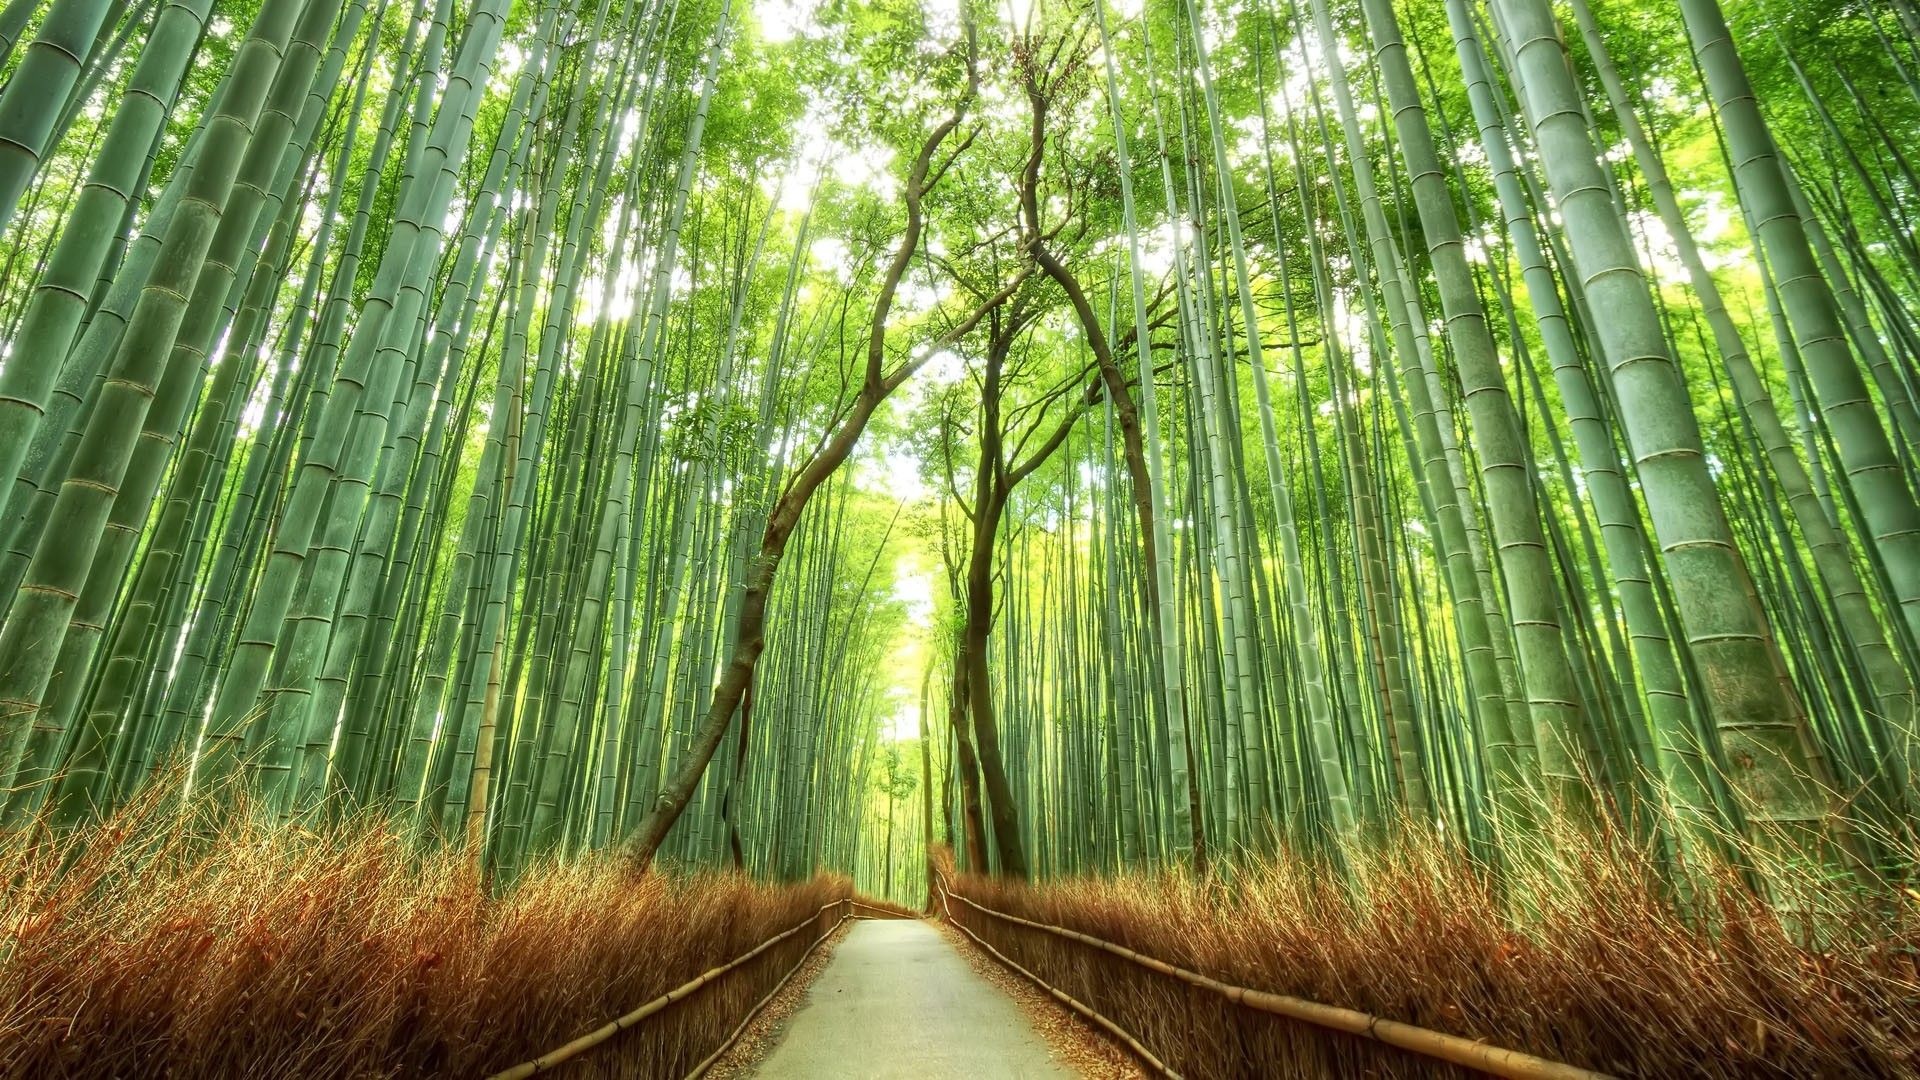 Bamboo: Forest, A giant woody grass which is grown chiefly in the tropics, An arborescent grass. 1920x1080 Full HD Wallpaper.